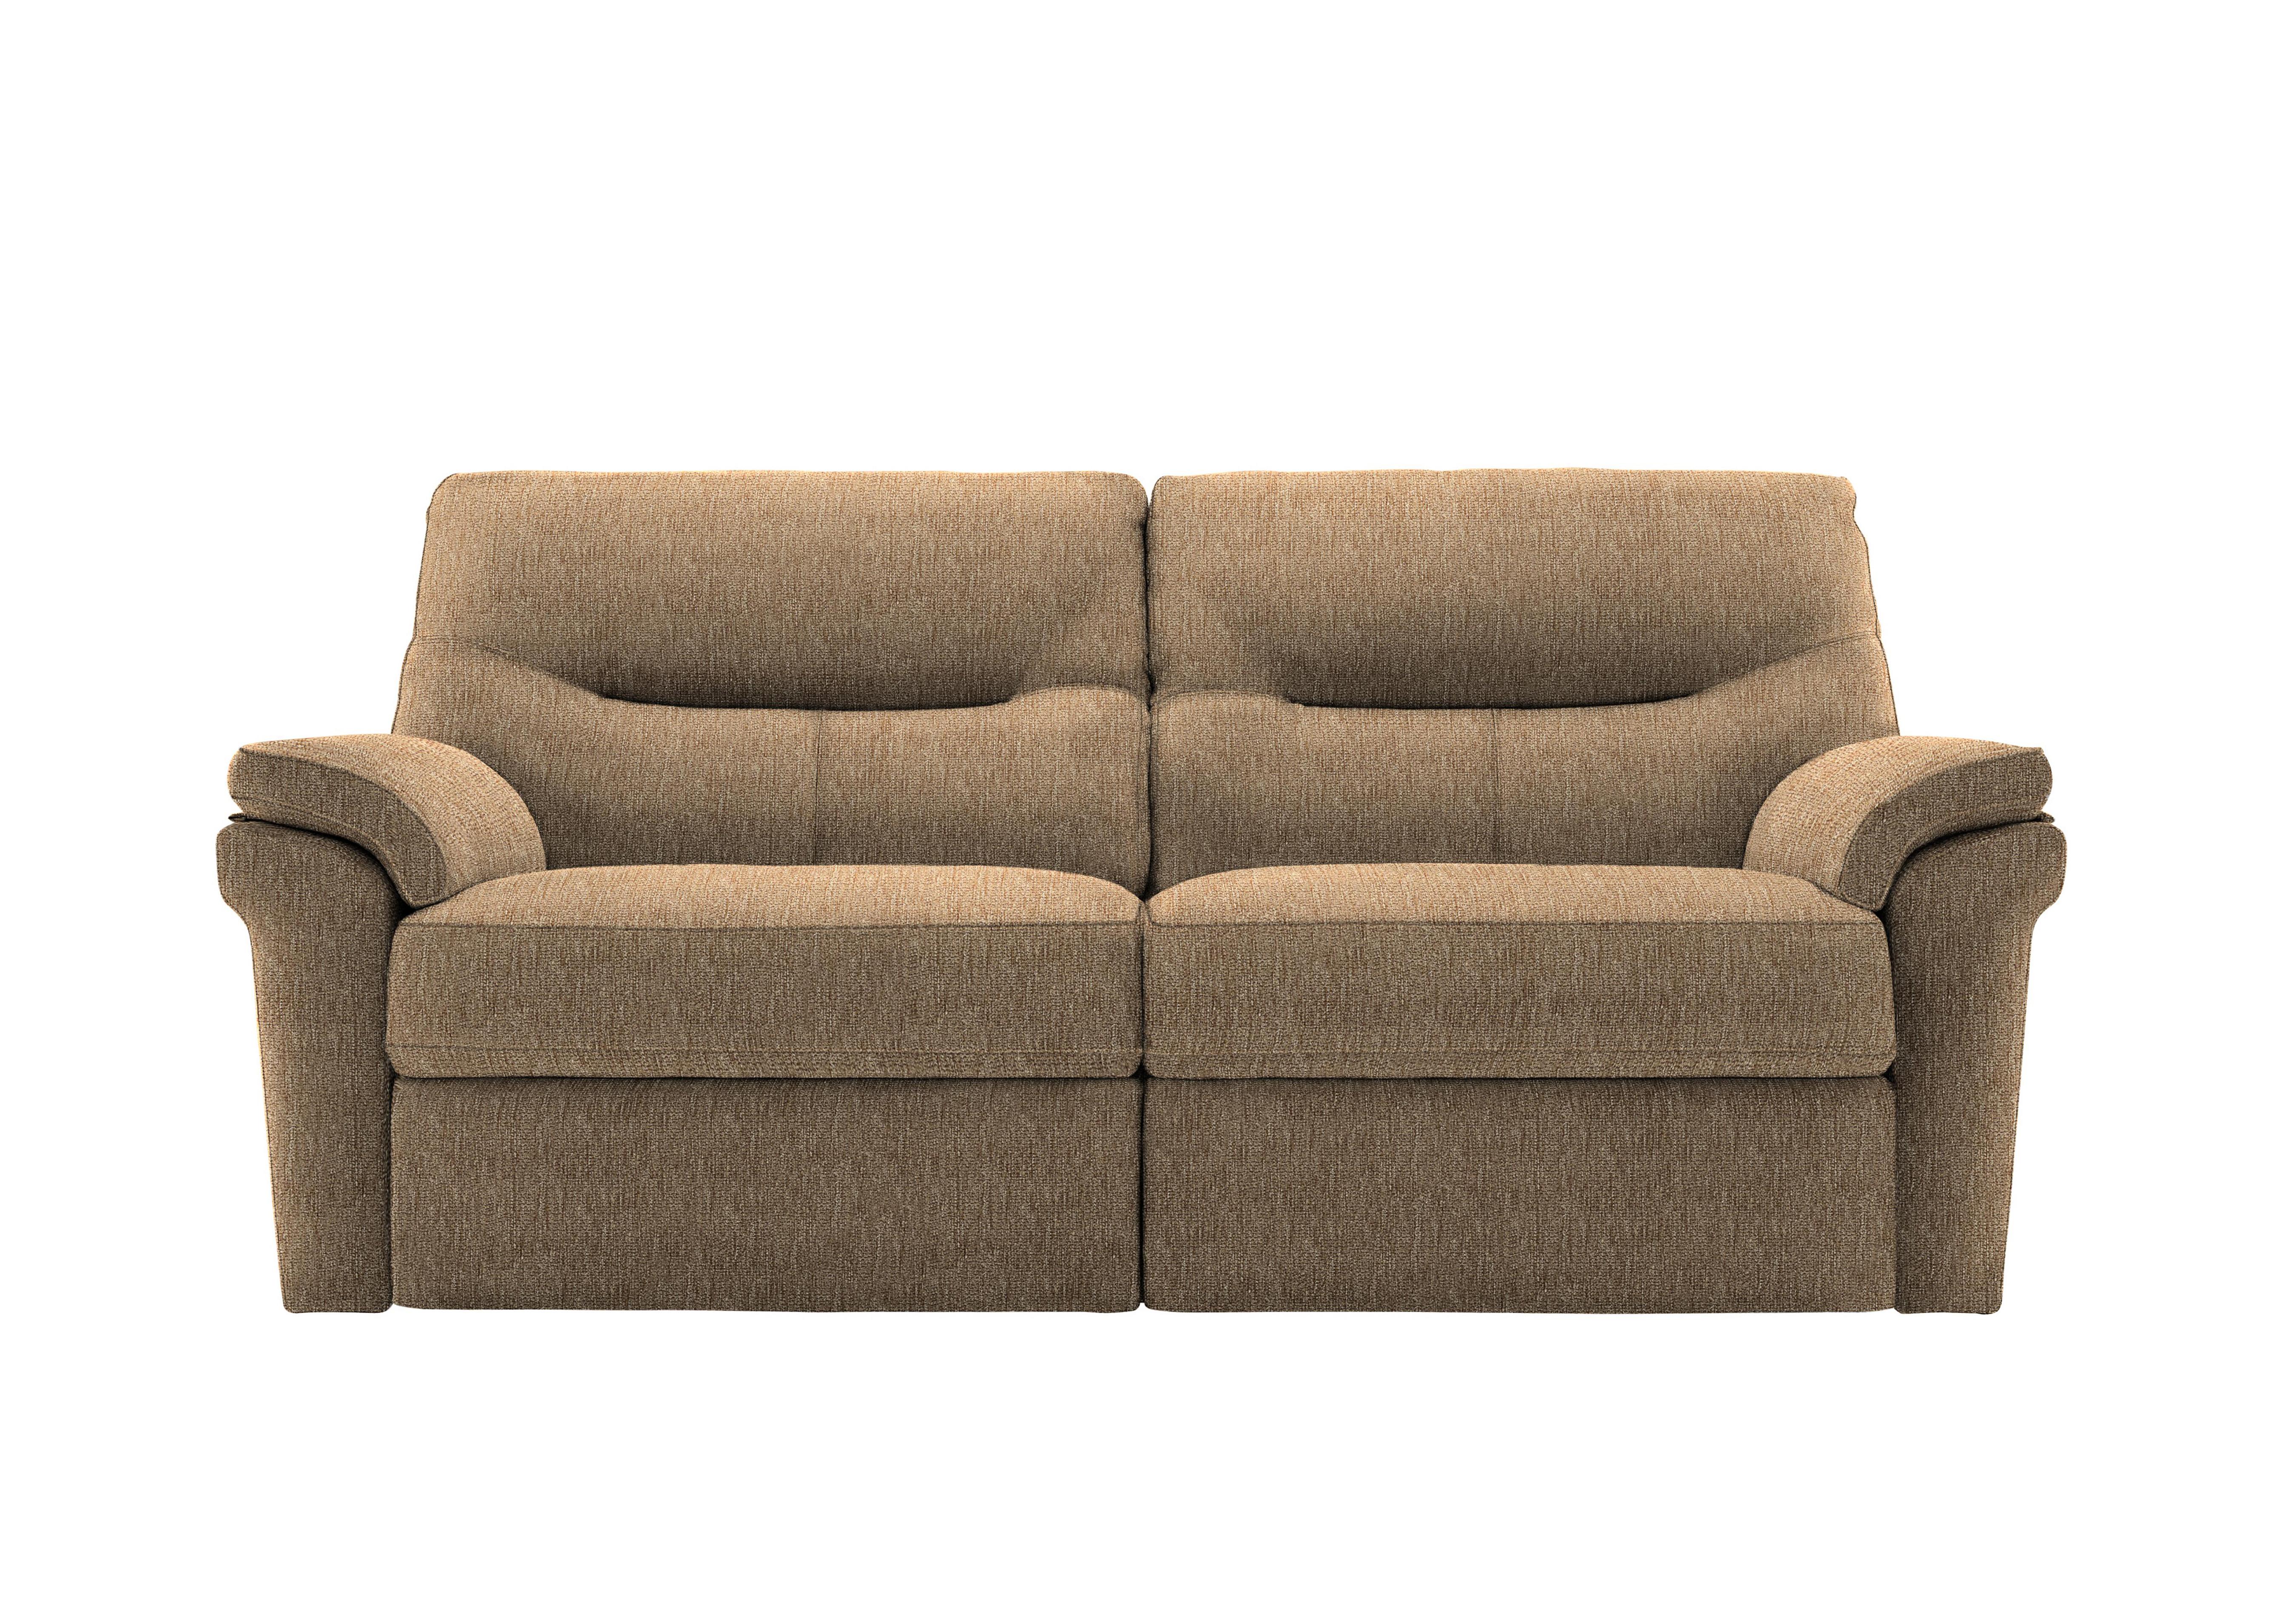 Seattle 3 Seater Fabric Power Recliner Sofa with Power Lumbar in A070 Boucle Cocoa on Furniture Village